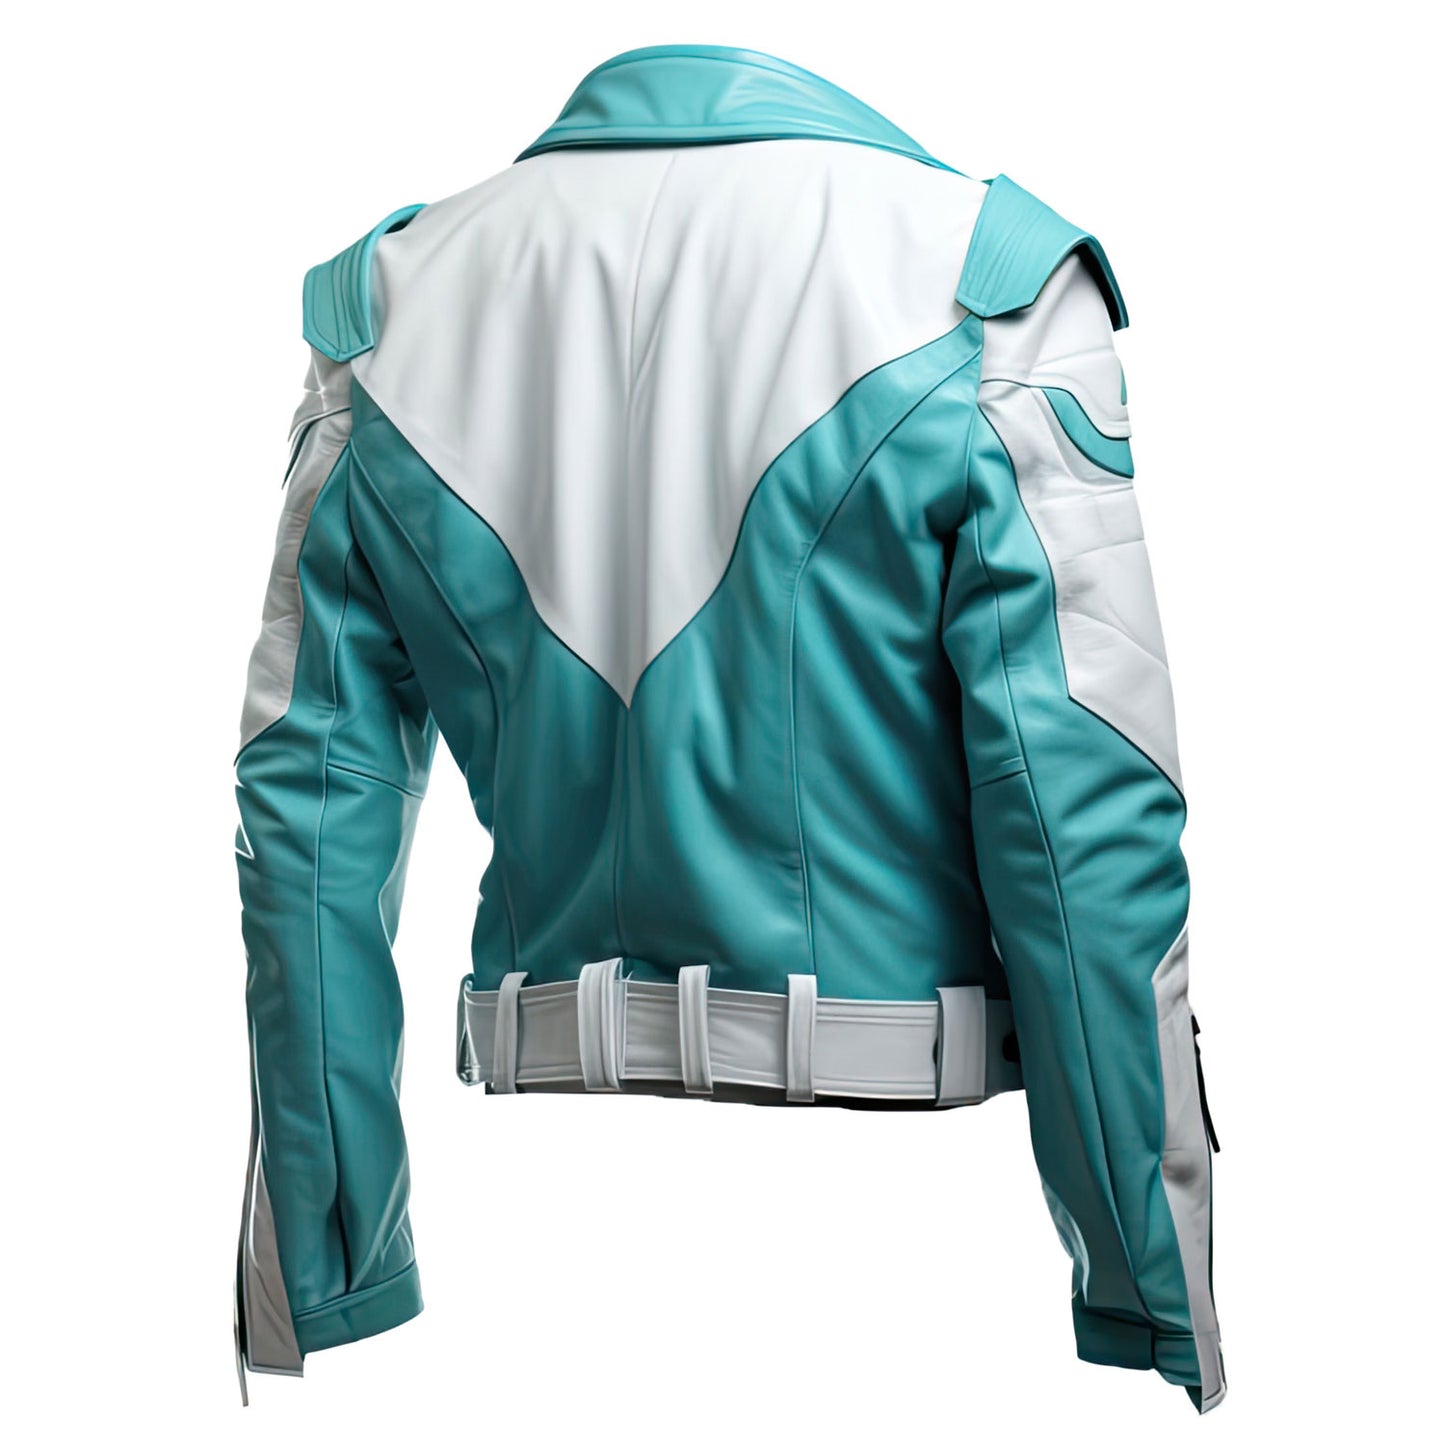 Men’s Turquoise Blue White Genuine Sheepskin Notch Lapel Collar Zip-Up Slim Fit Biker Outfit Casual Lightweight Leather Jacket